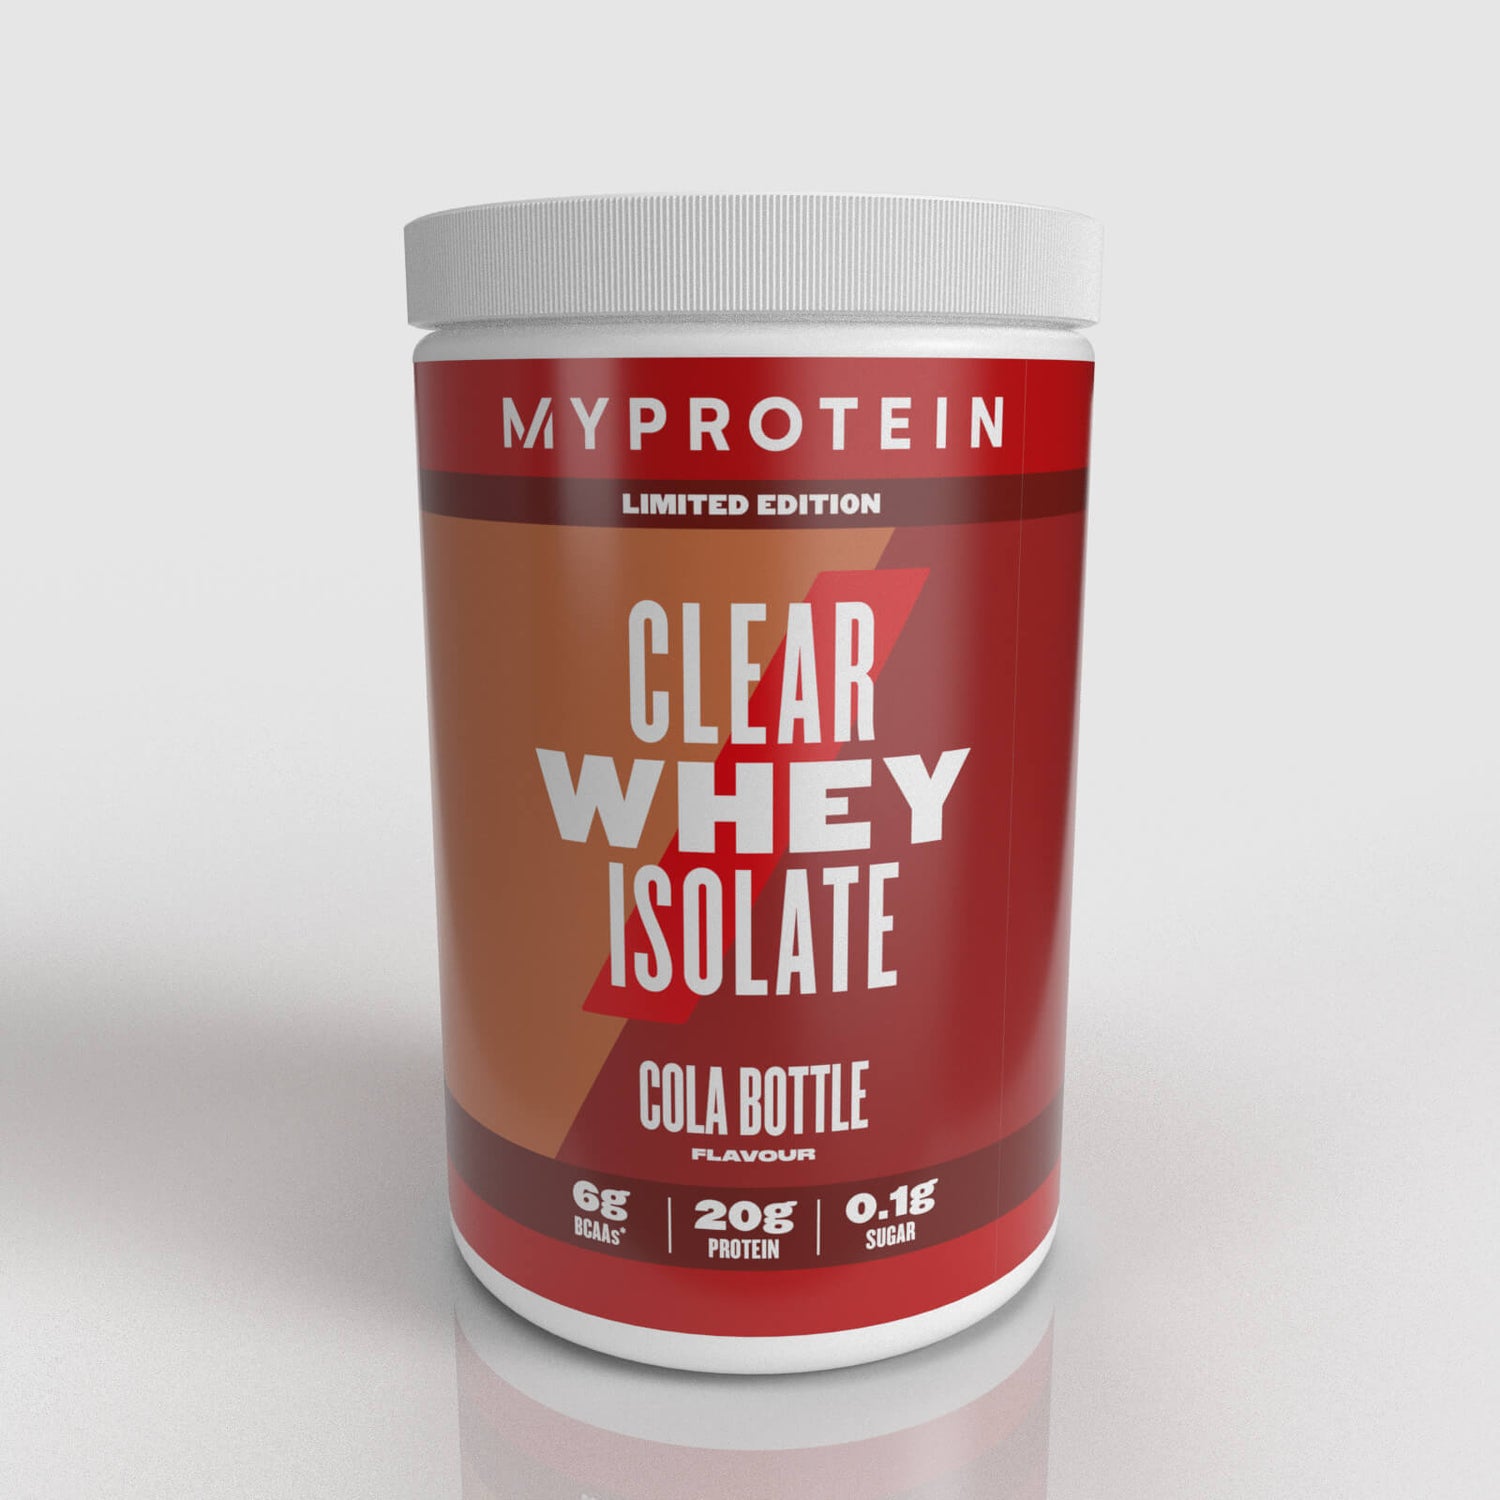 Clear Whey Isolate - Cola Bottle flavour - 20servings